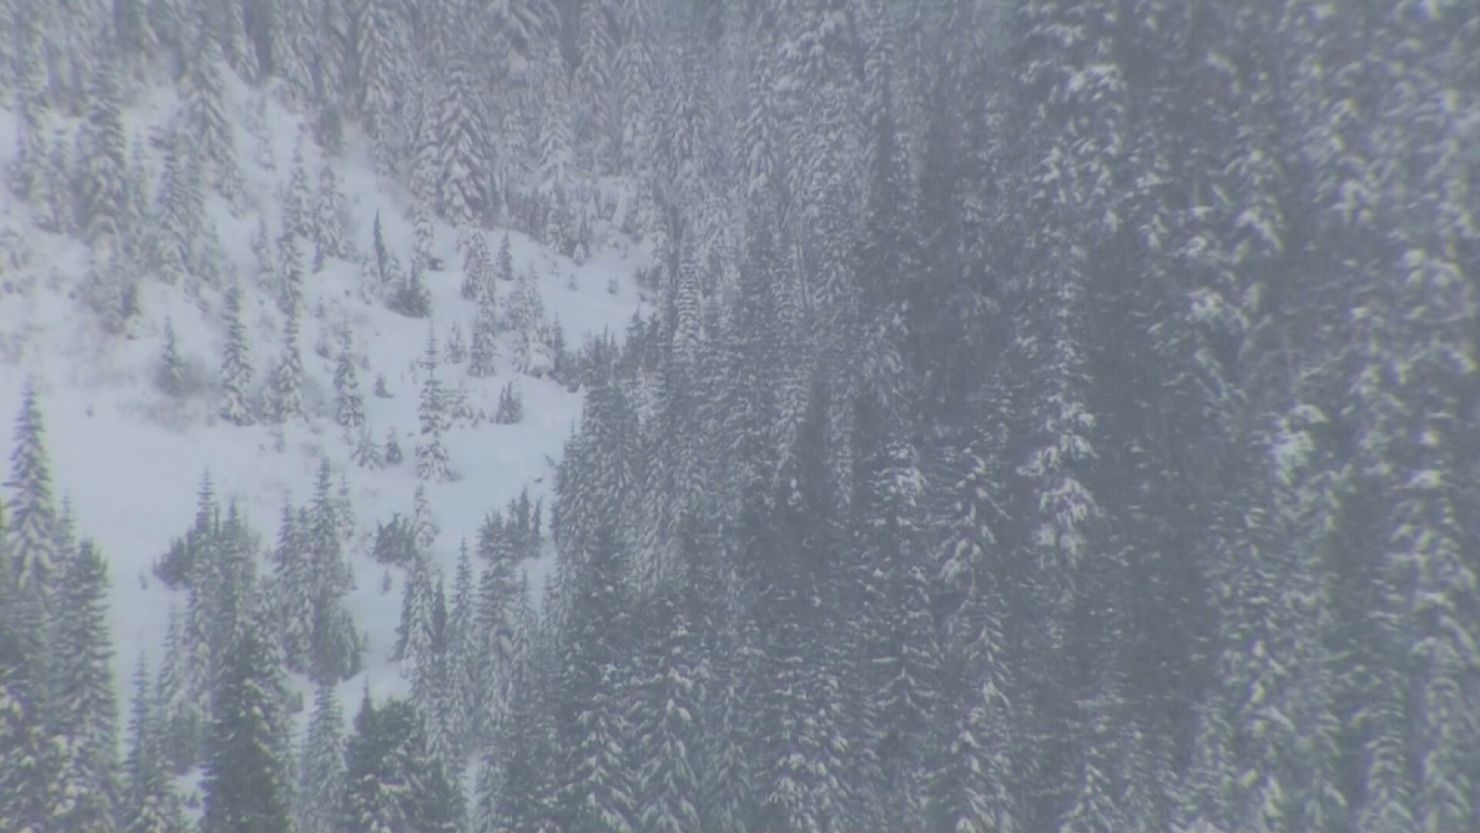 Skiers triggered an avalanche that killed one person Saturday, Crystal Mountain Ski Resort said. 